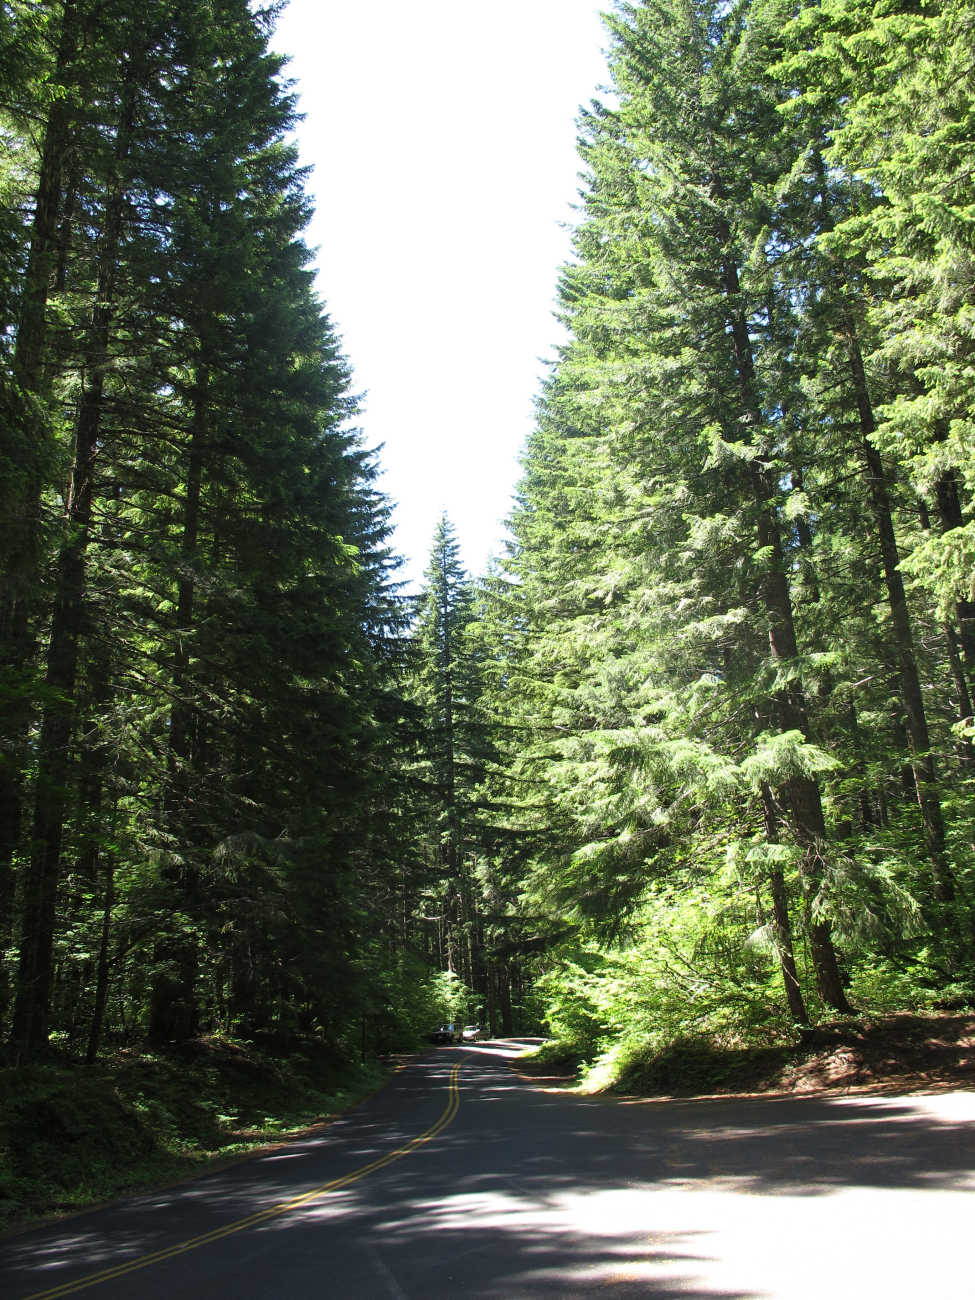 The glorious Douglas fir forest on the west side of the Cascade Mountains